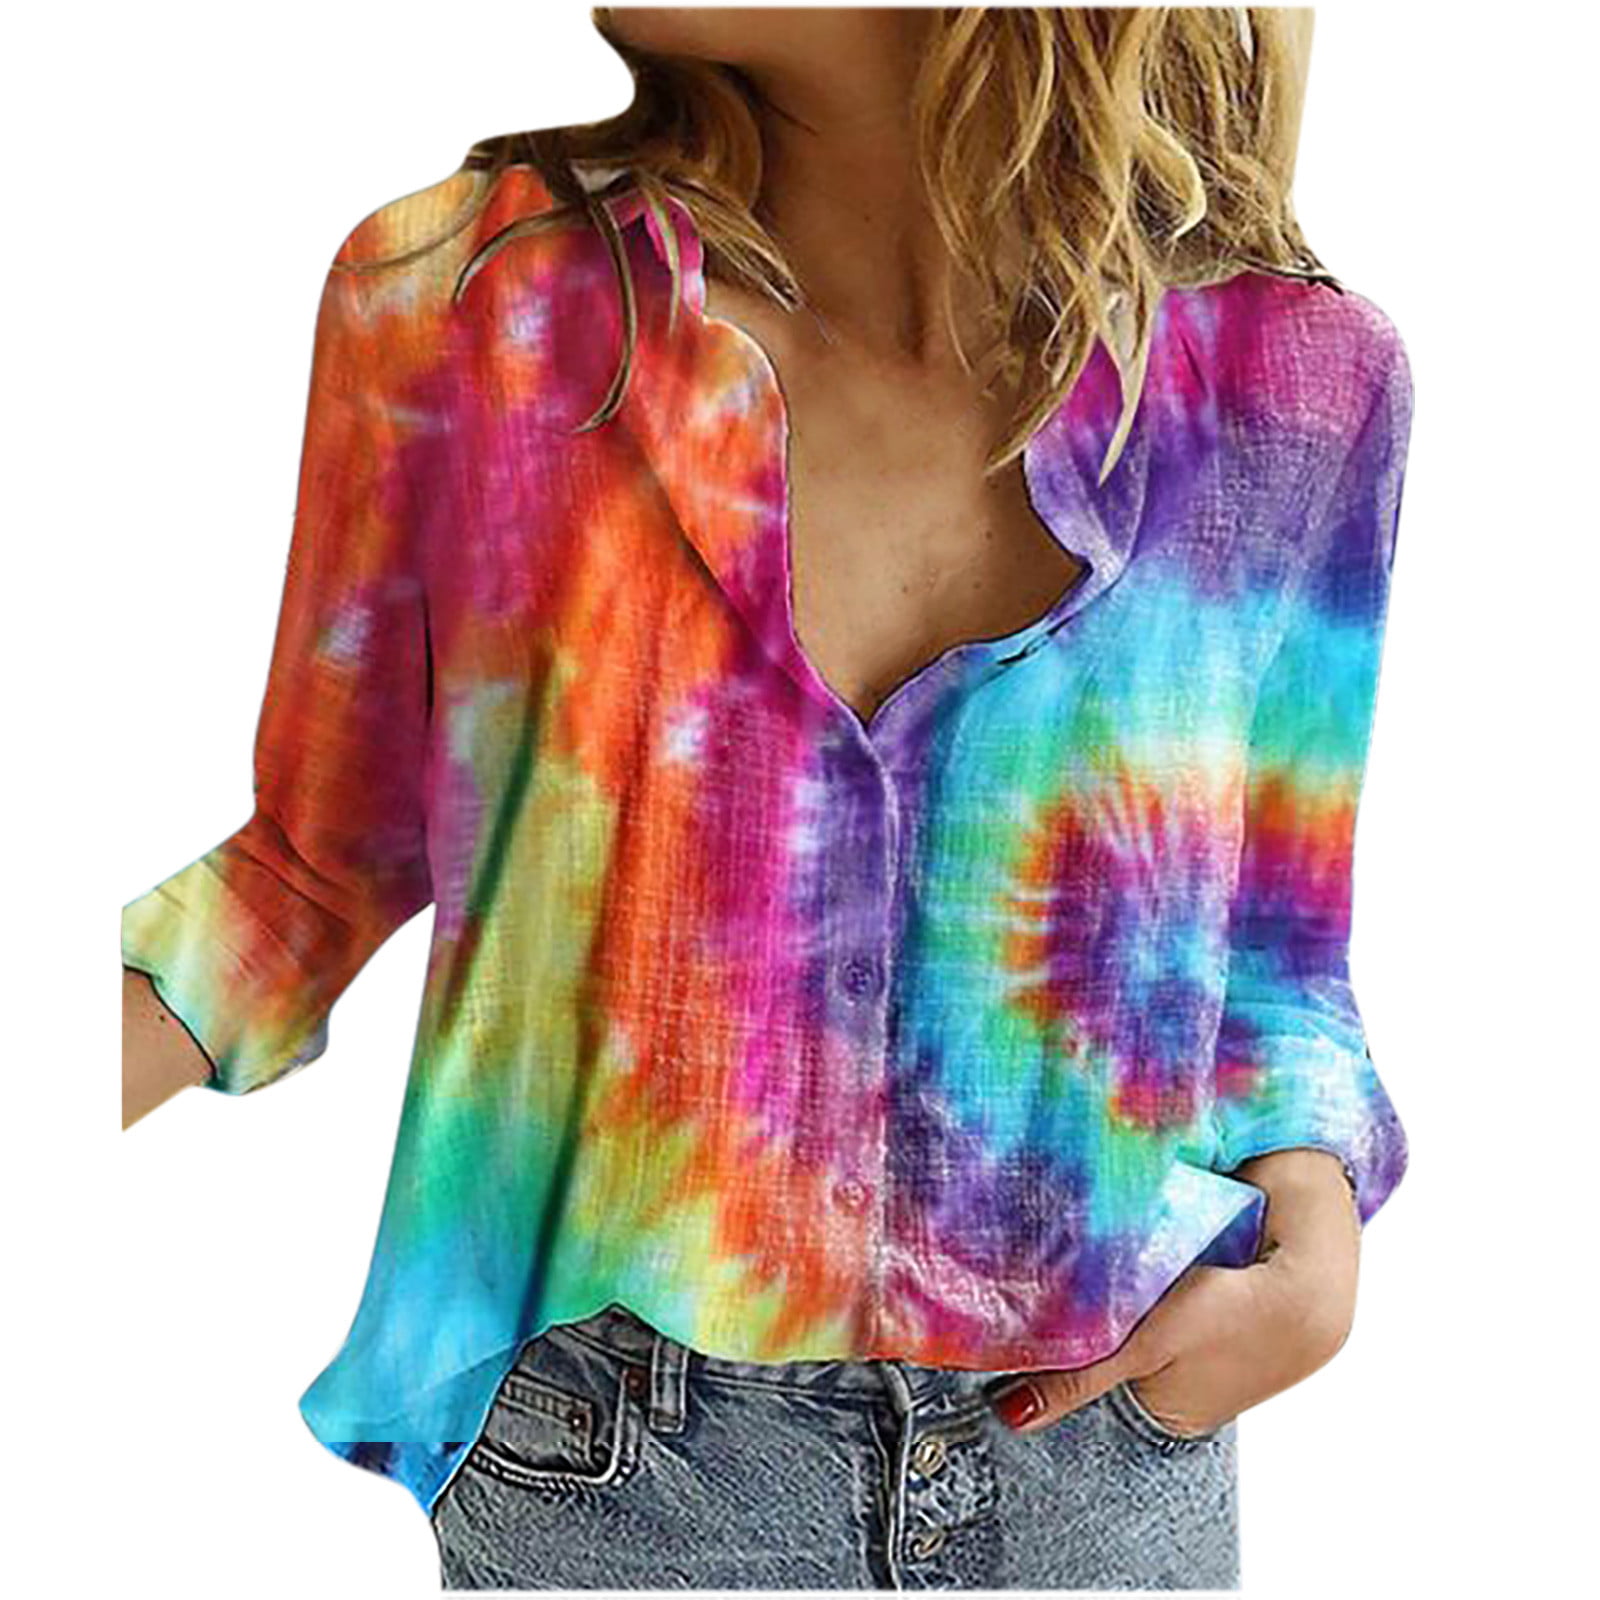 Meikosks Womens Tie Dyeing T Shirt Plus Size Tops Long Sleeve V-Neck Blouses Casual Loose Tunic 